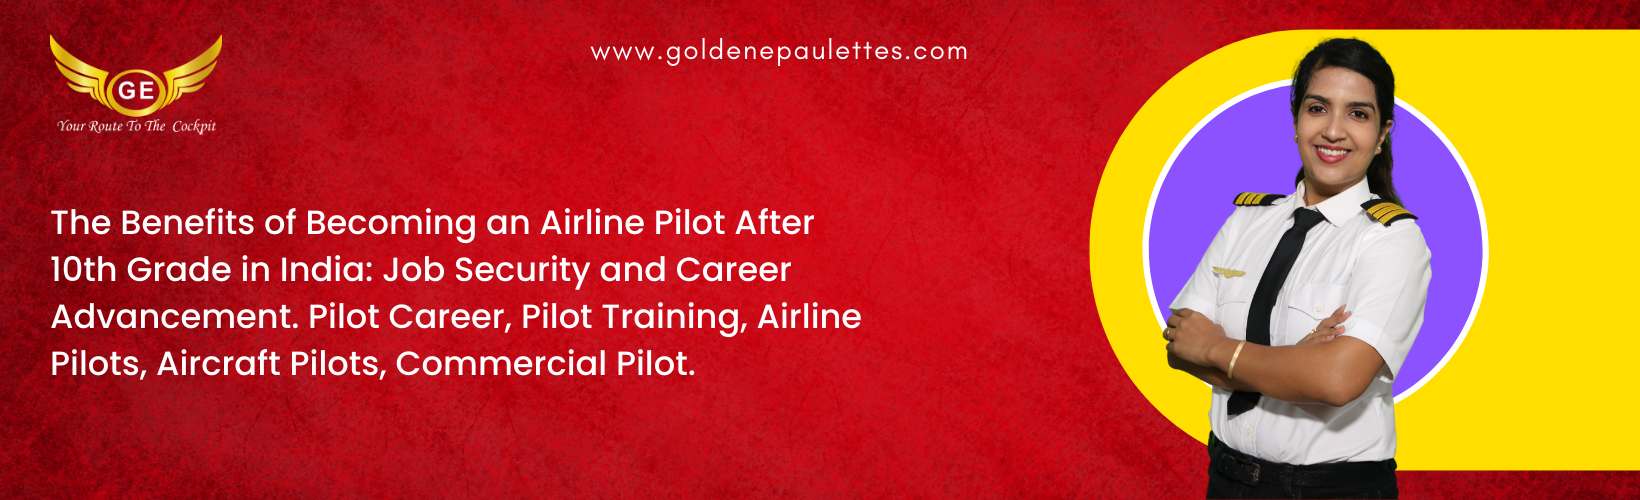 What Are the Benefits of Becoming an Airline Pilot After 10th Grade in India